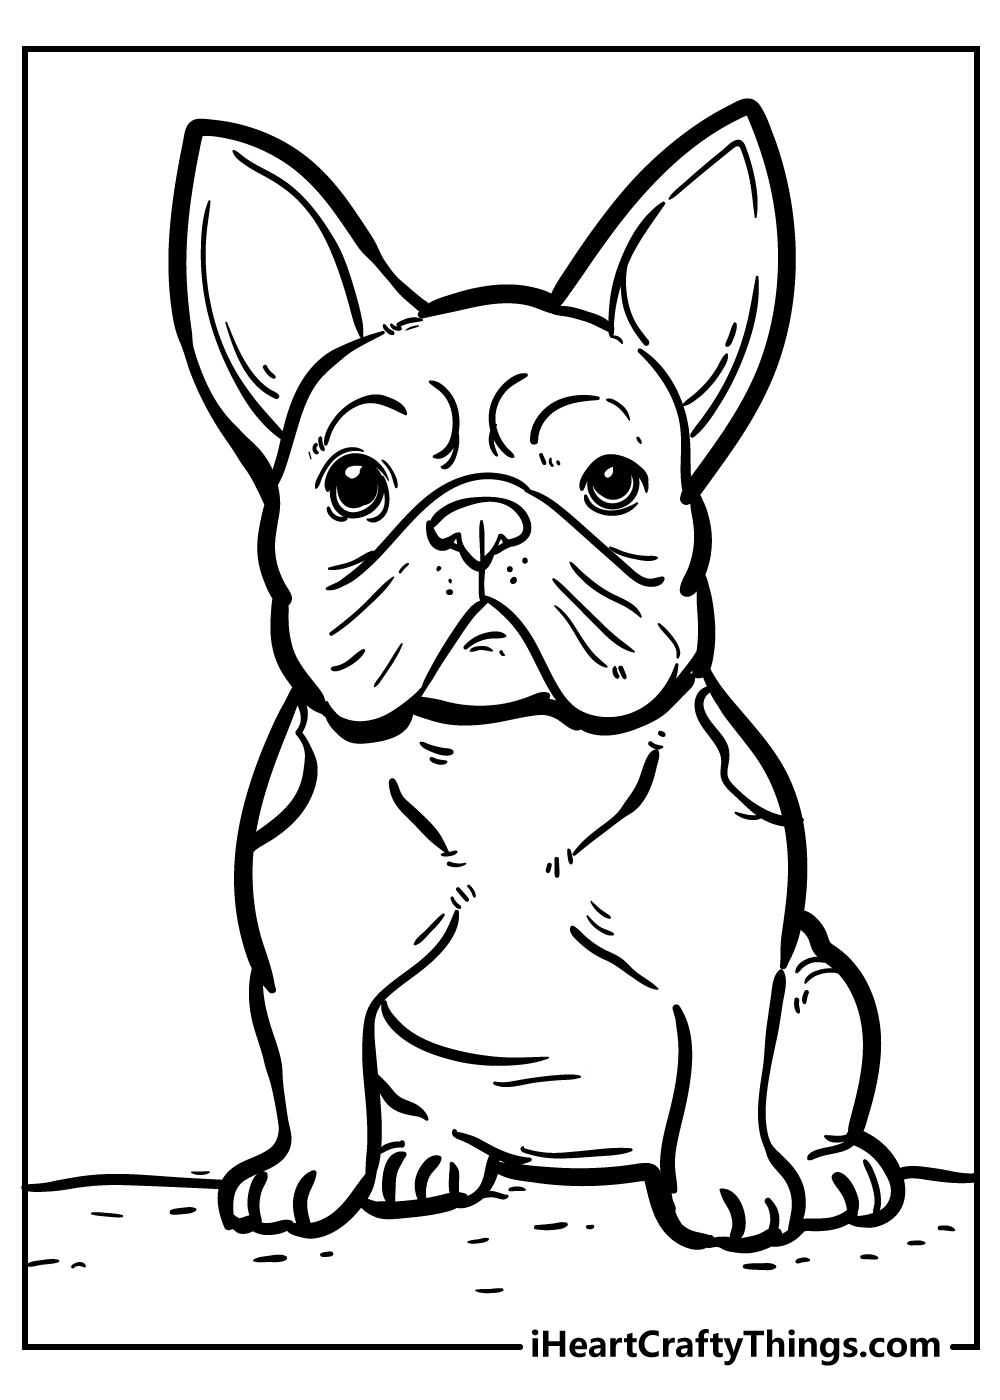 Dog Coloring Pages   Super Adorable And 18 Free 18